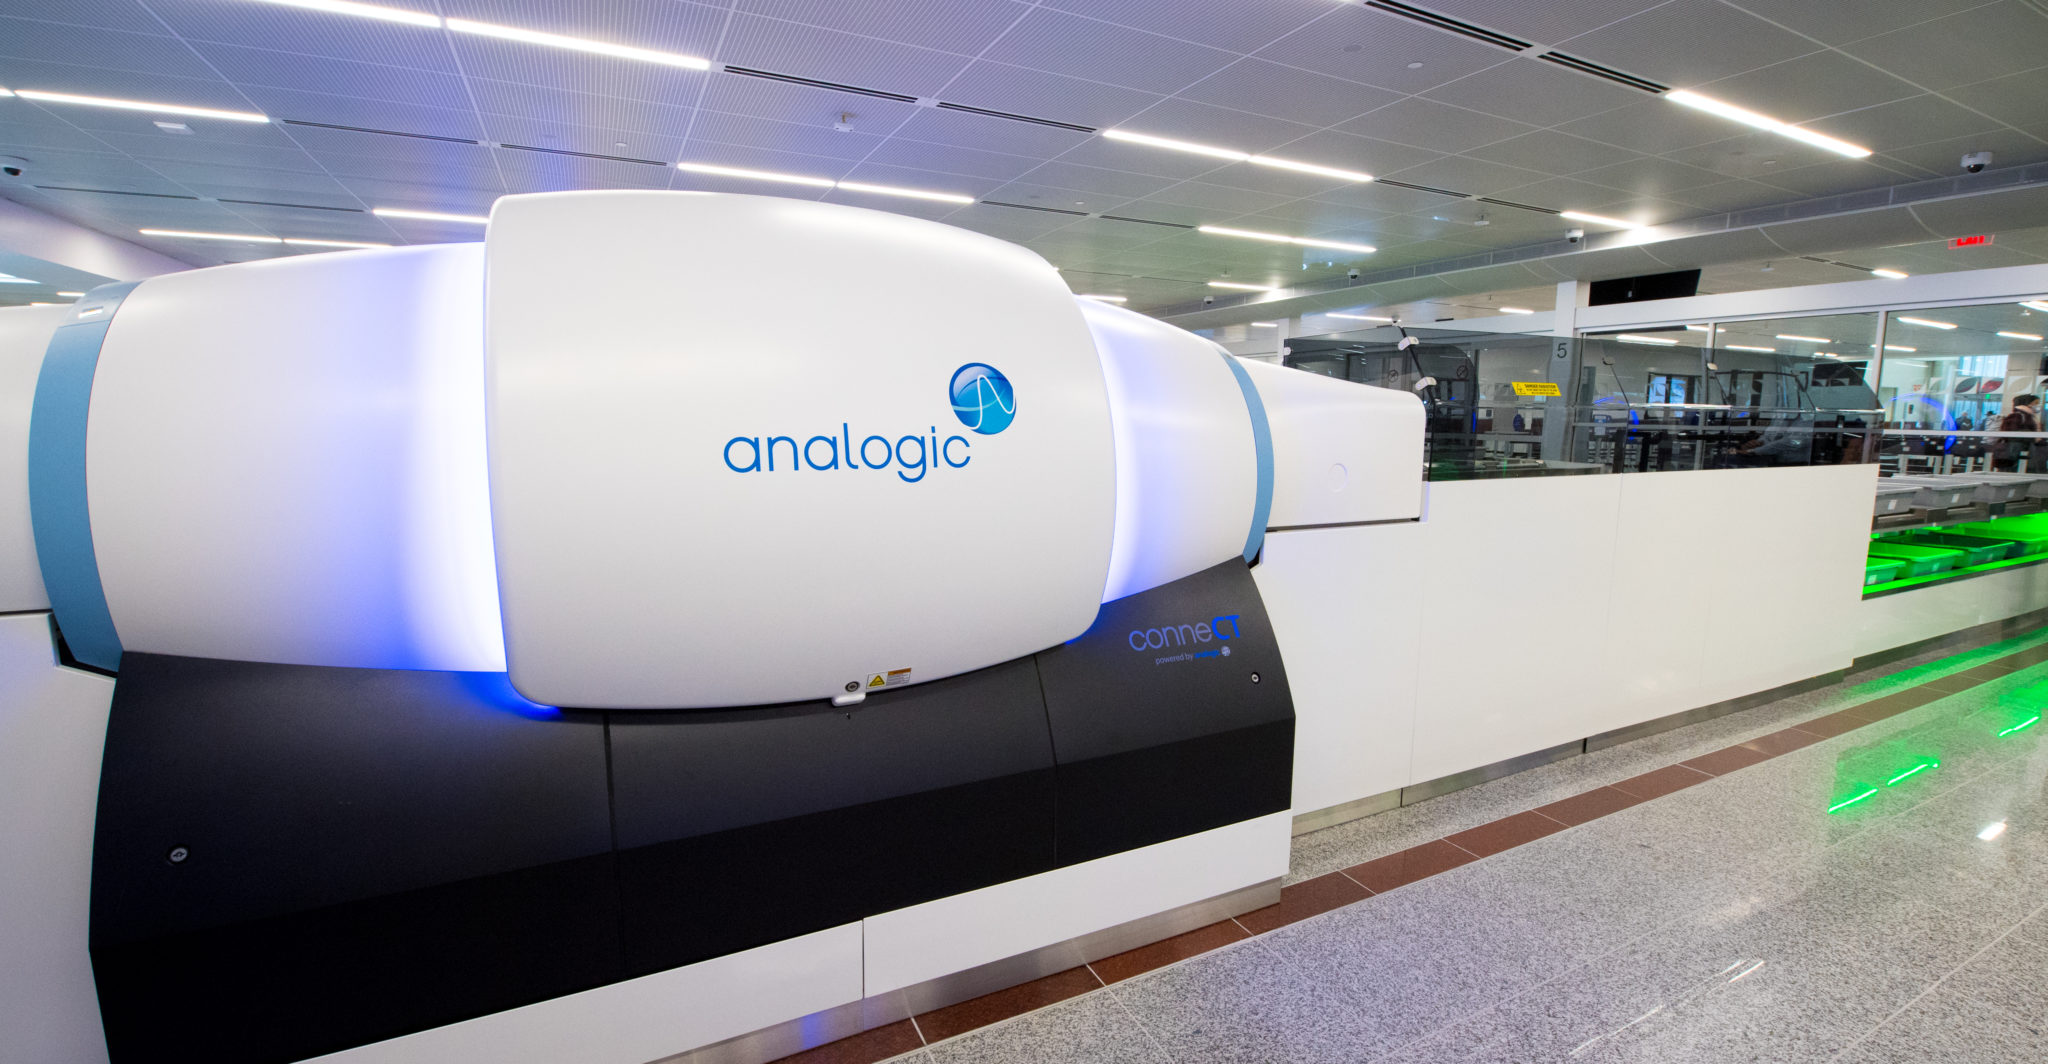 An Analogic CT scanner used for airport security screening